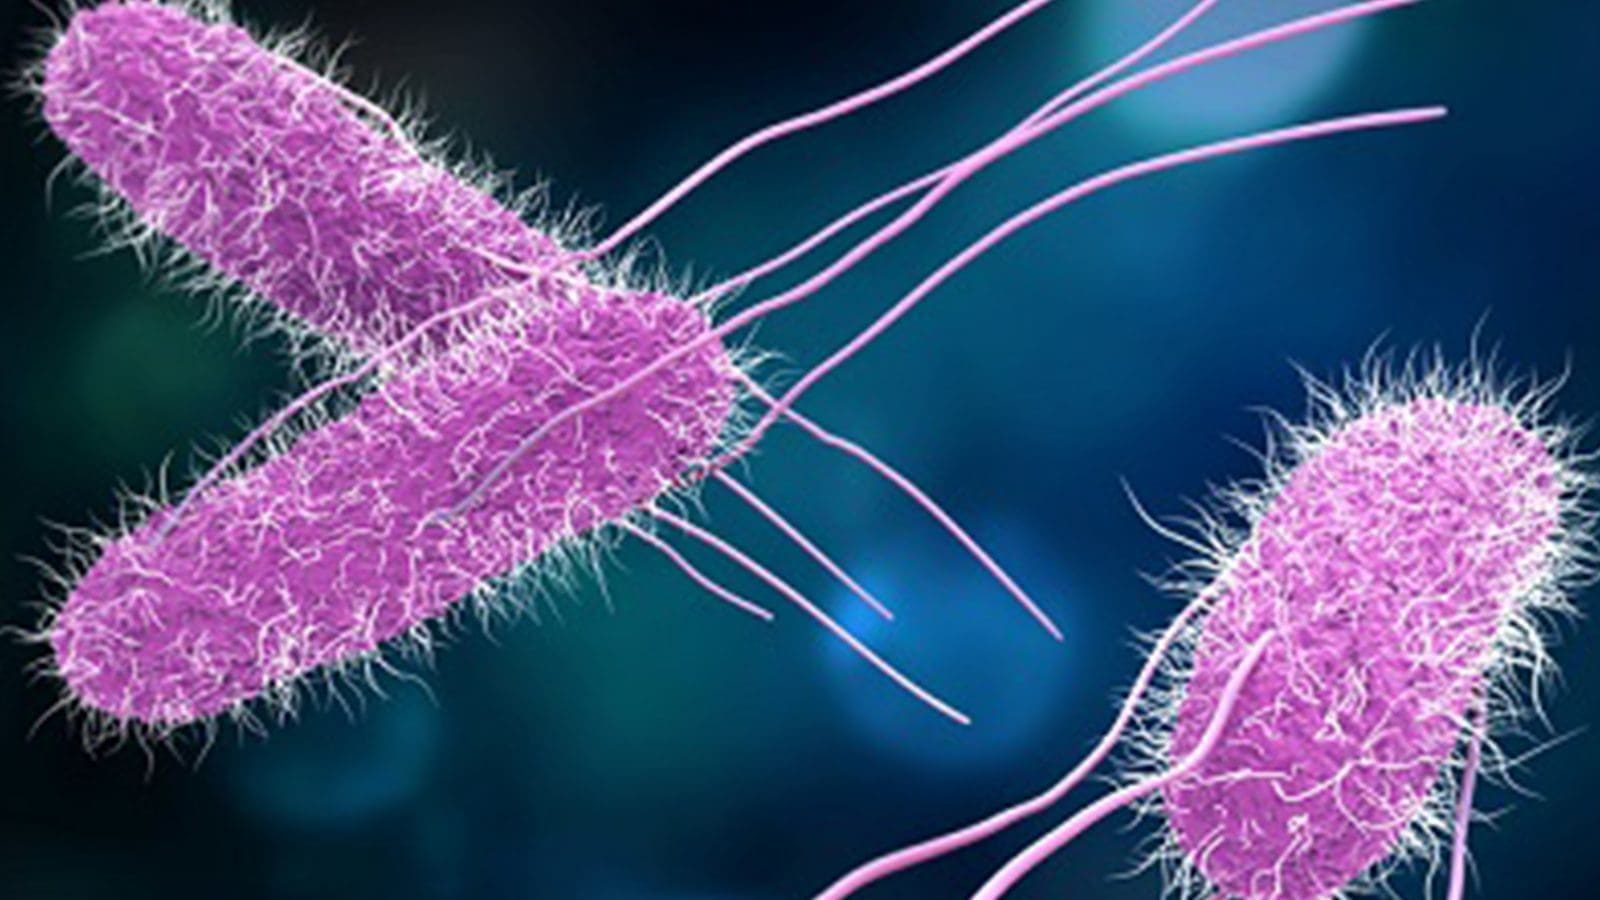 CDC study reveals alarming impact of antimicrobial resistance on foodborne salmonellosis